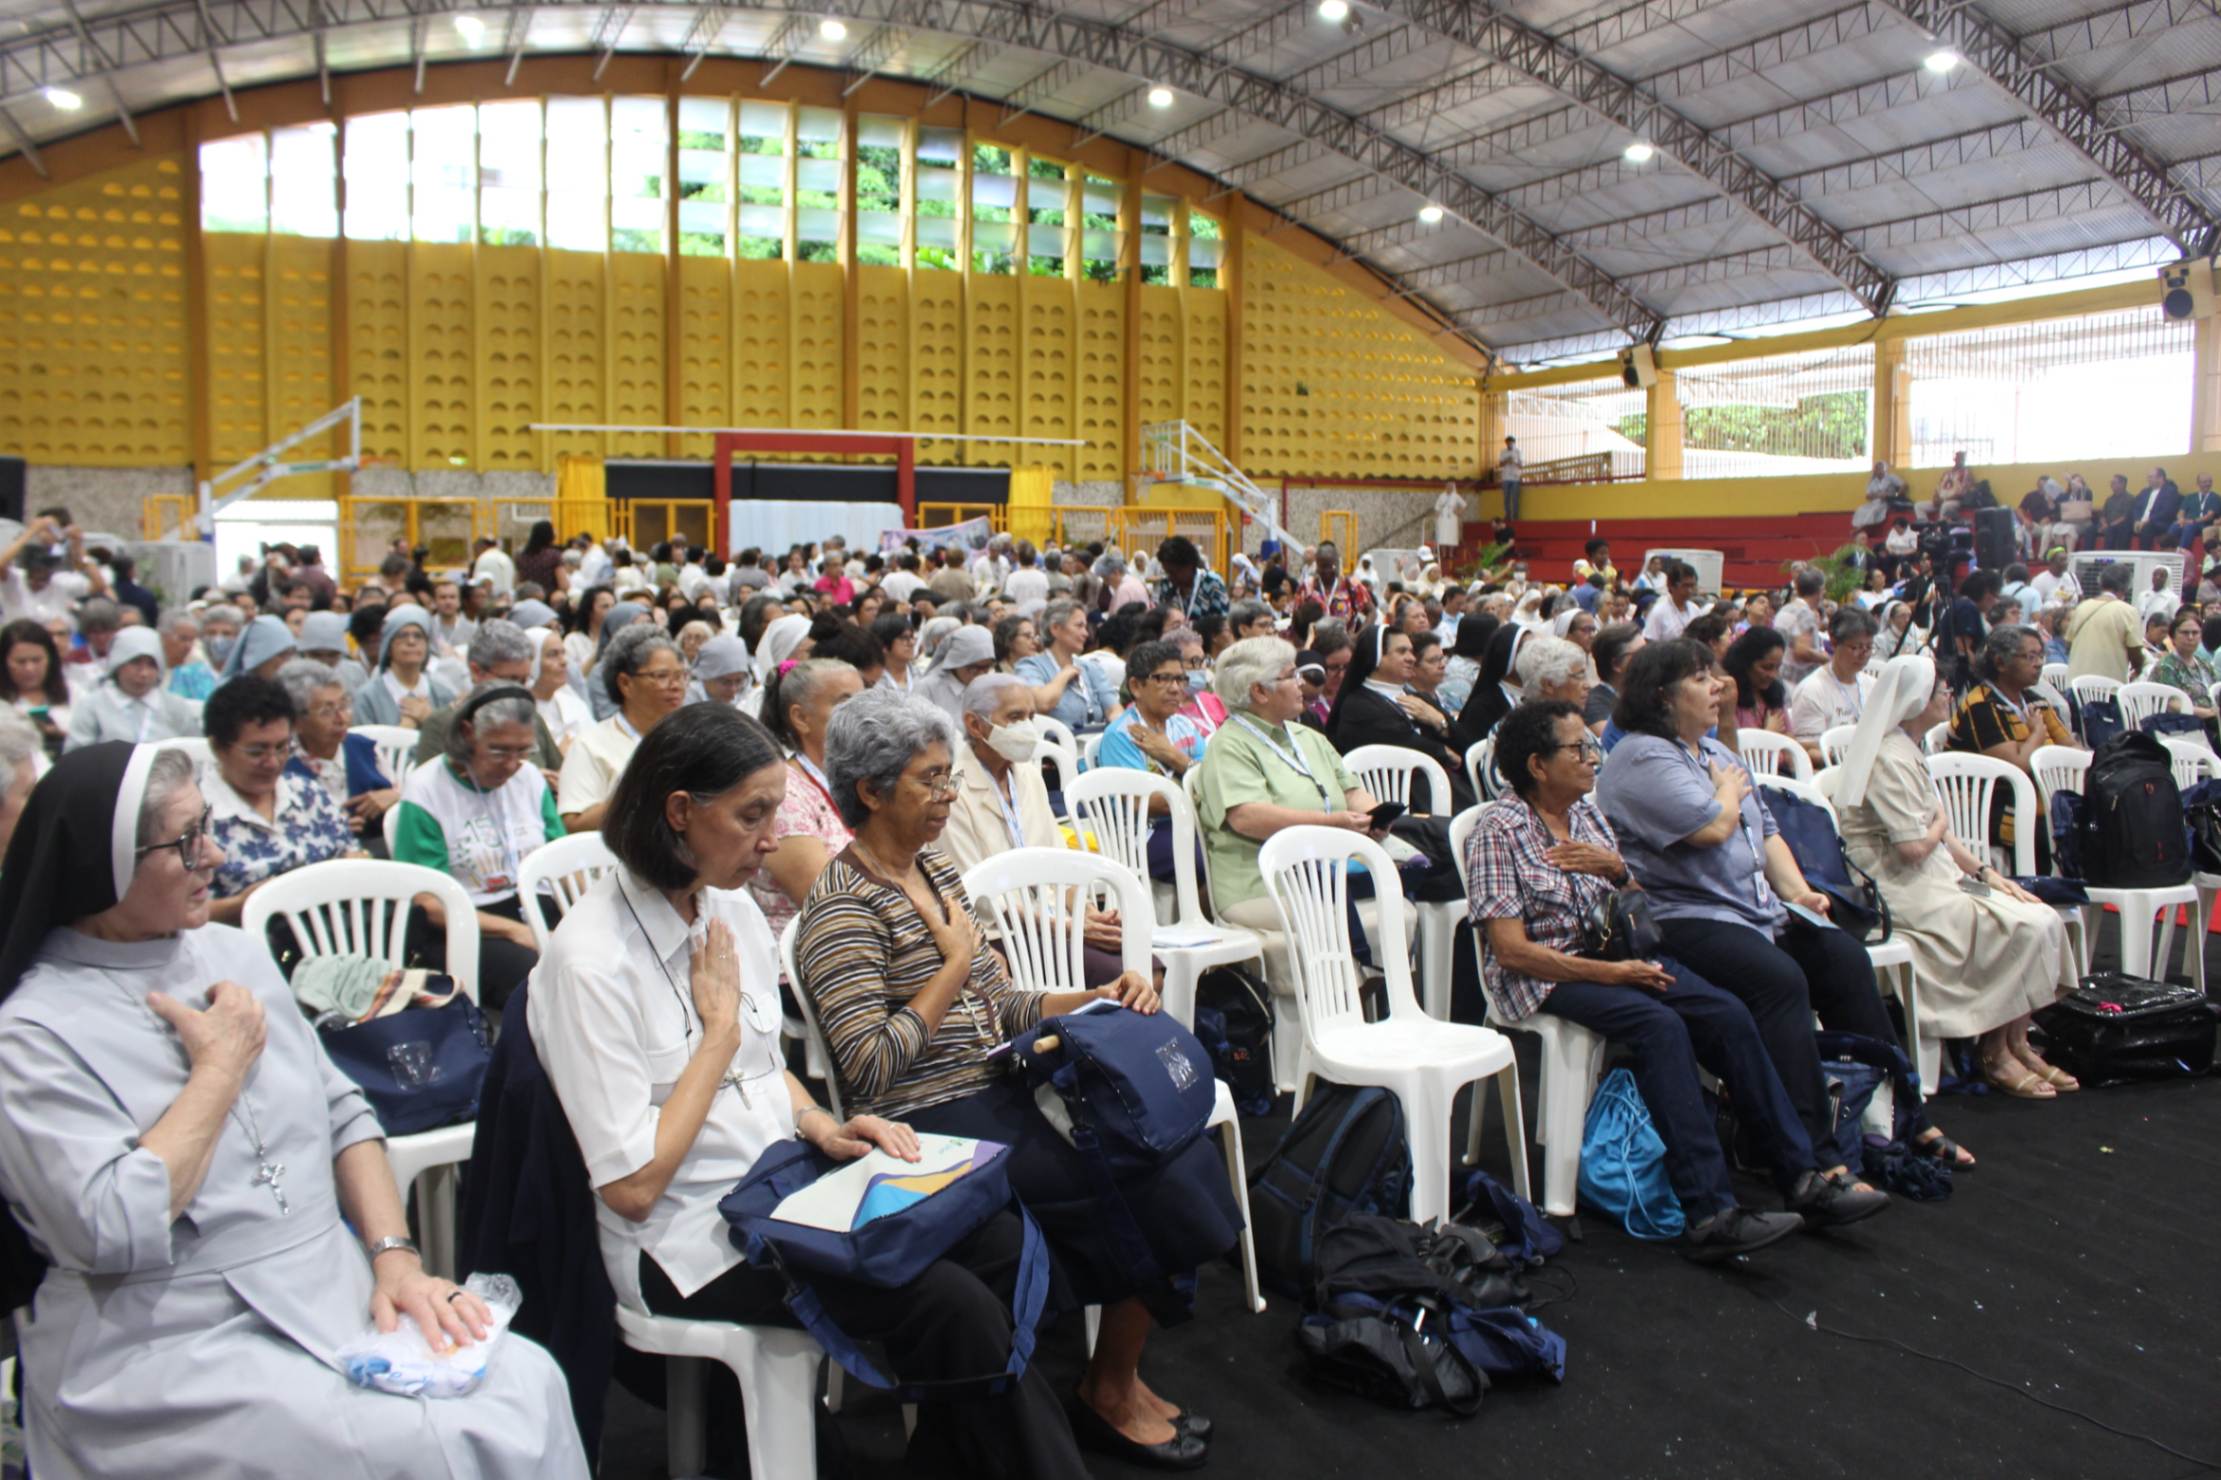 AParticipants celebrating 70 years of the Confederation of Religious in Brazil, held May 30-June 2 in Fortaleza, Ceara. (Courtesy of CRB)